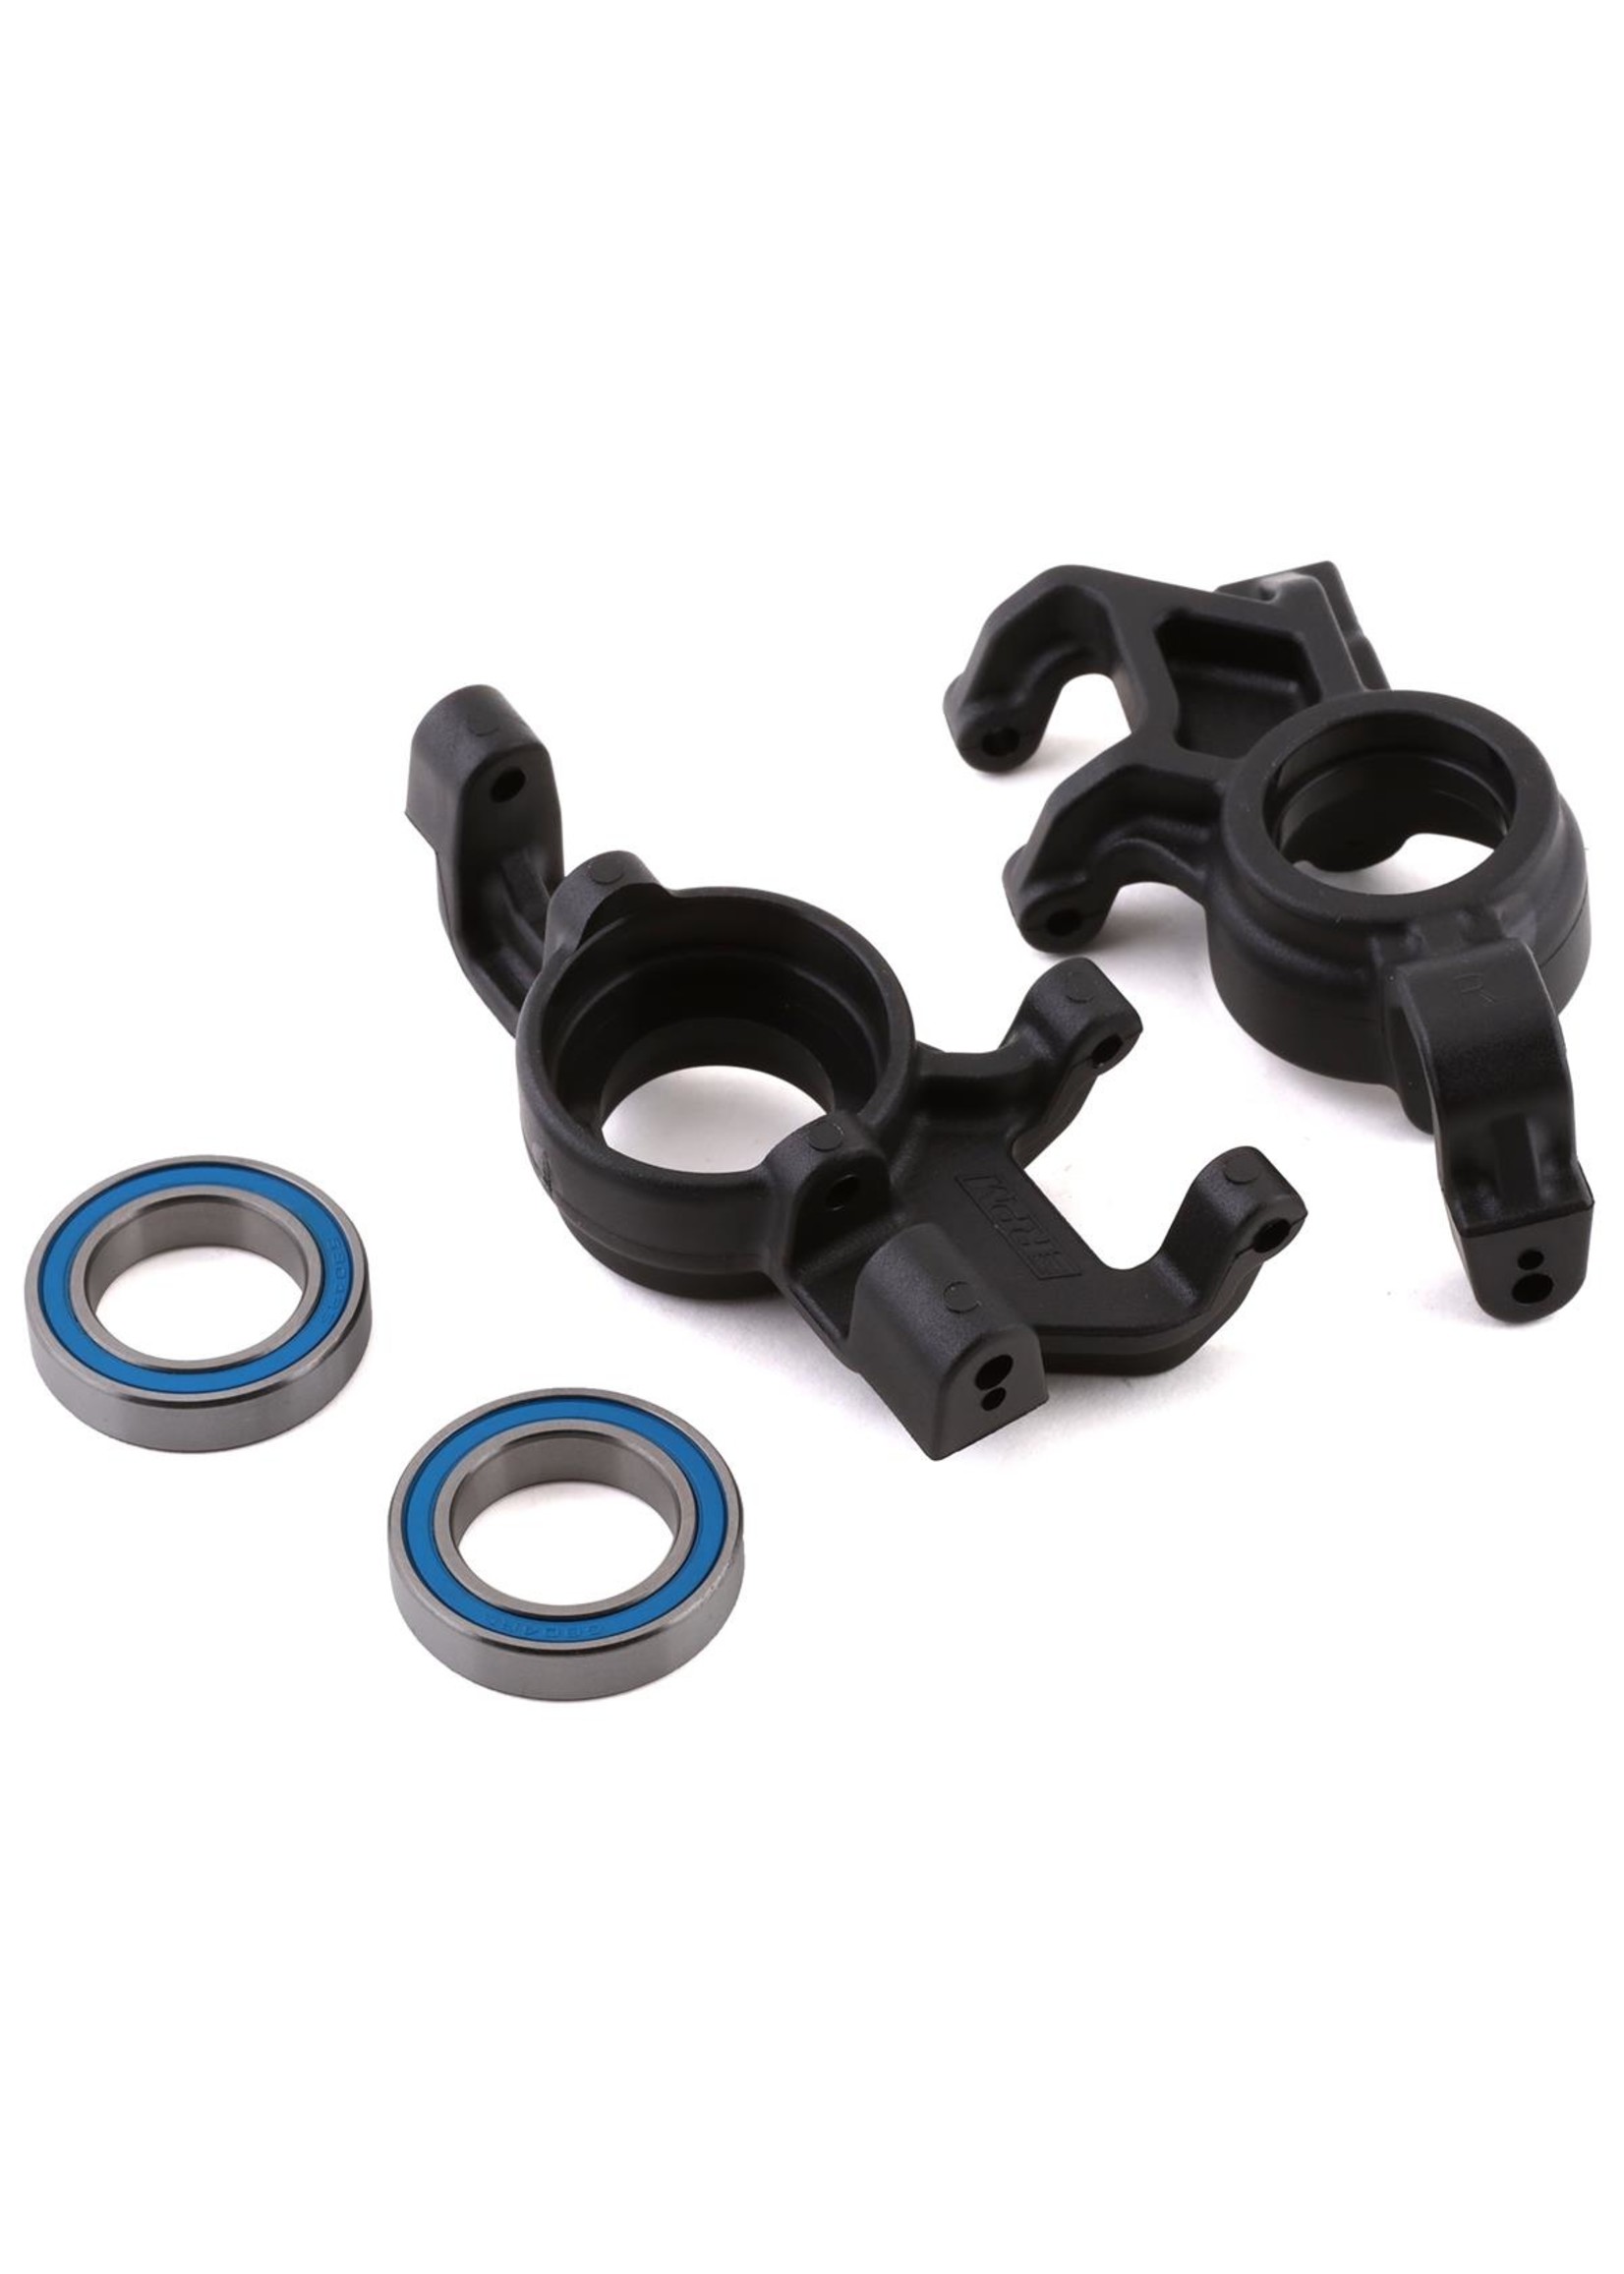 RPM RPM80662 RPM Oversized Front Axle Carriers for the Traxxas X-Maxx